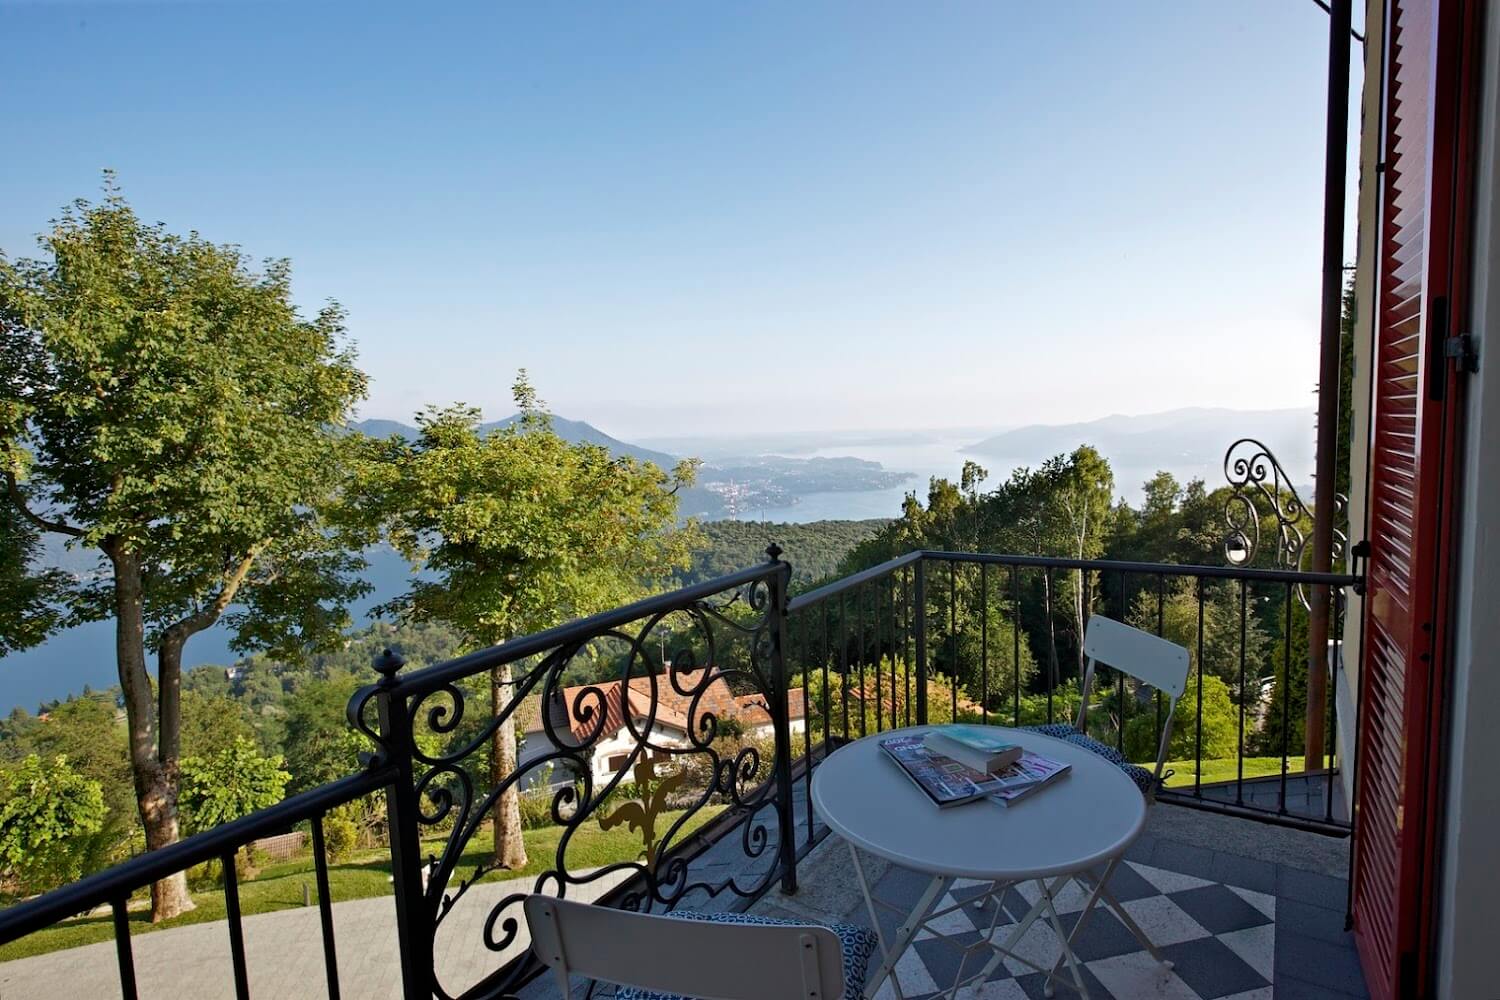 View forever from one of the balconies at Villa Confalonieri